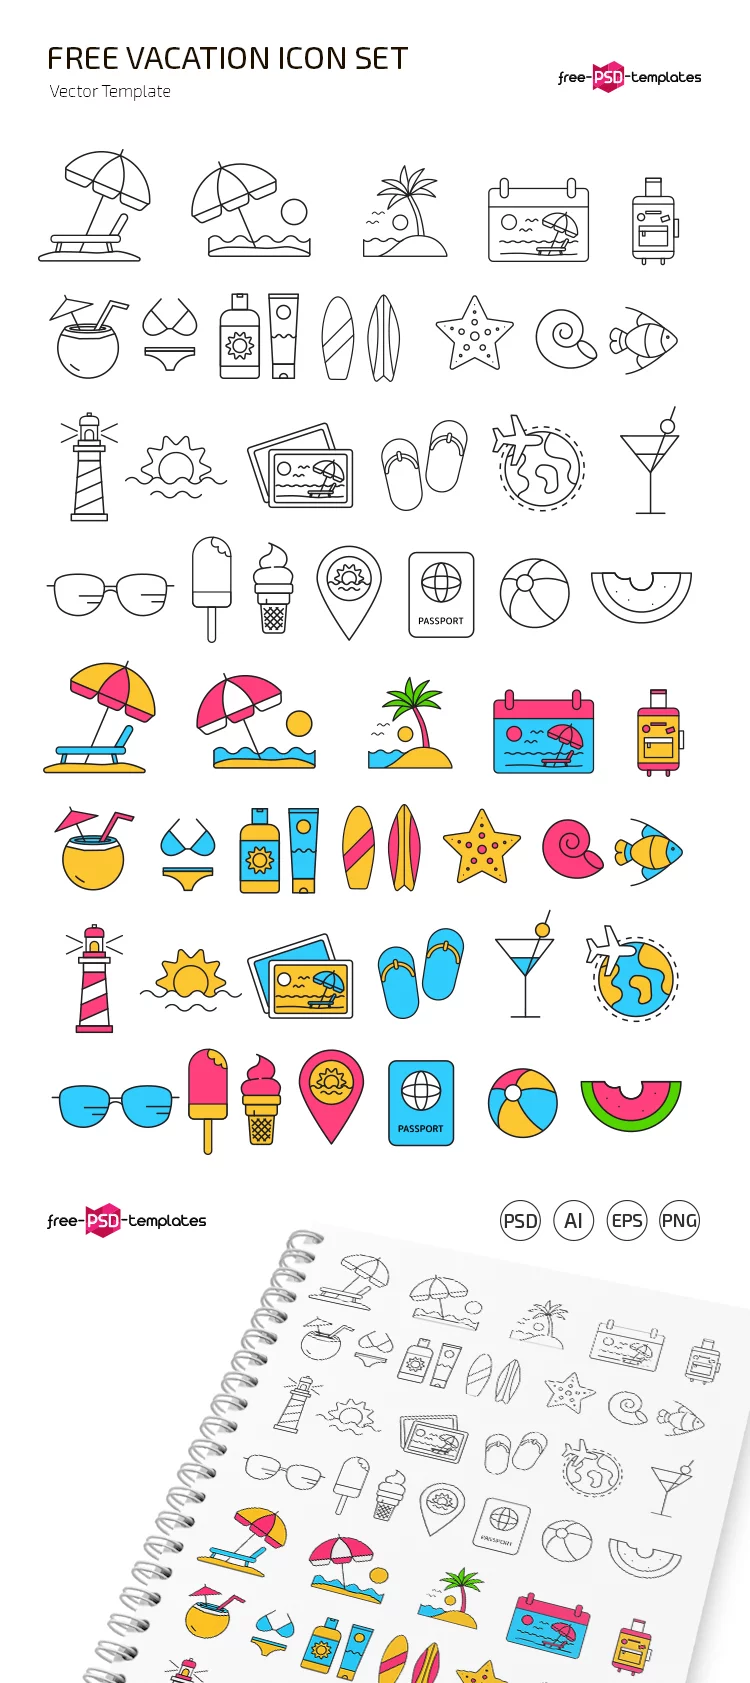 Free Vacation Icons Set (PSD, AI, EPS, PNG)